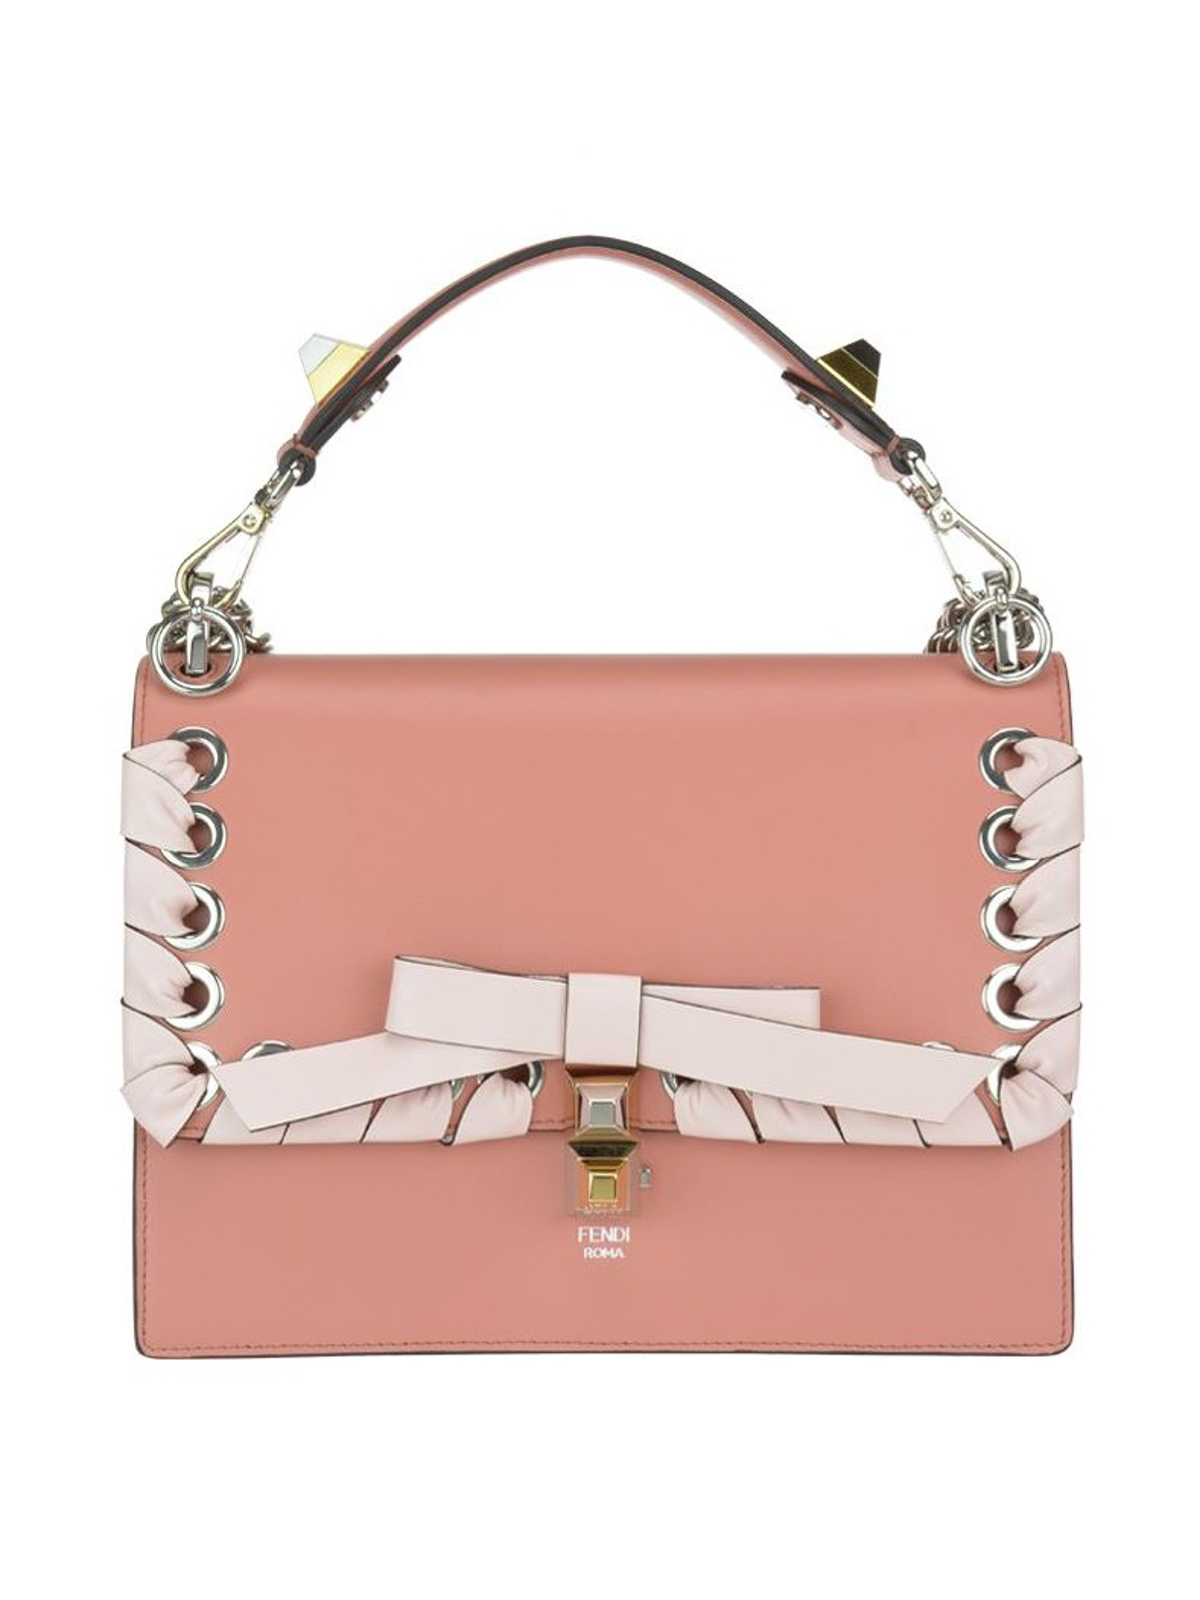 Fendi - Kan I pink leather bag with bow 